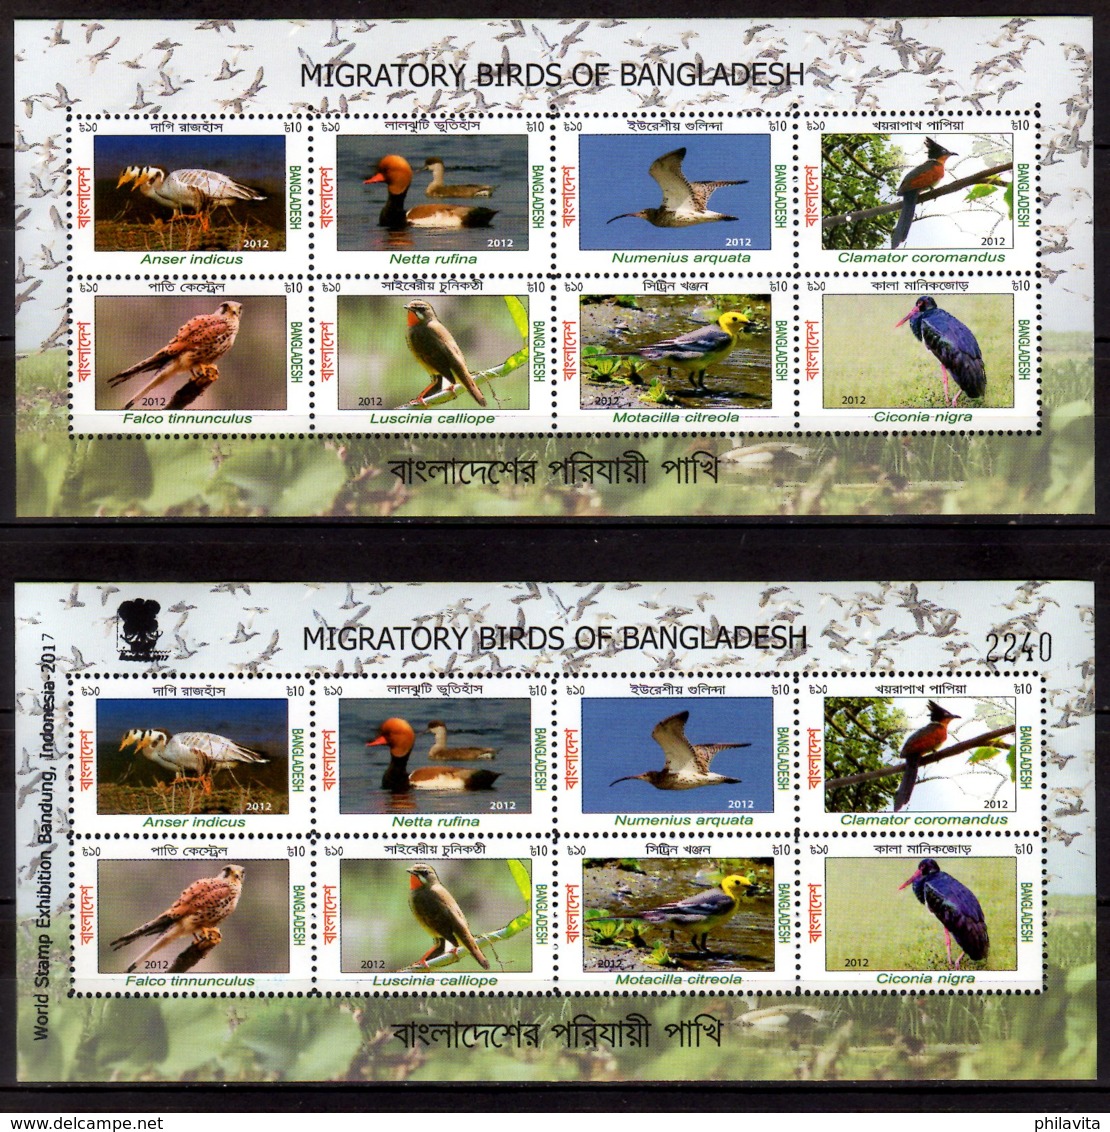 2013/17 Bangladesh MIgratory Birds -1MS+1 MS Overprint Bandung  MNH** MiNr. 1112A - 1119A  (rg) Falcon, Ibis, Storks - Arends & Roofvogels